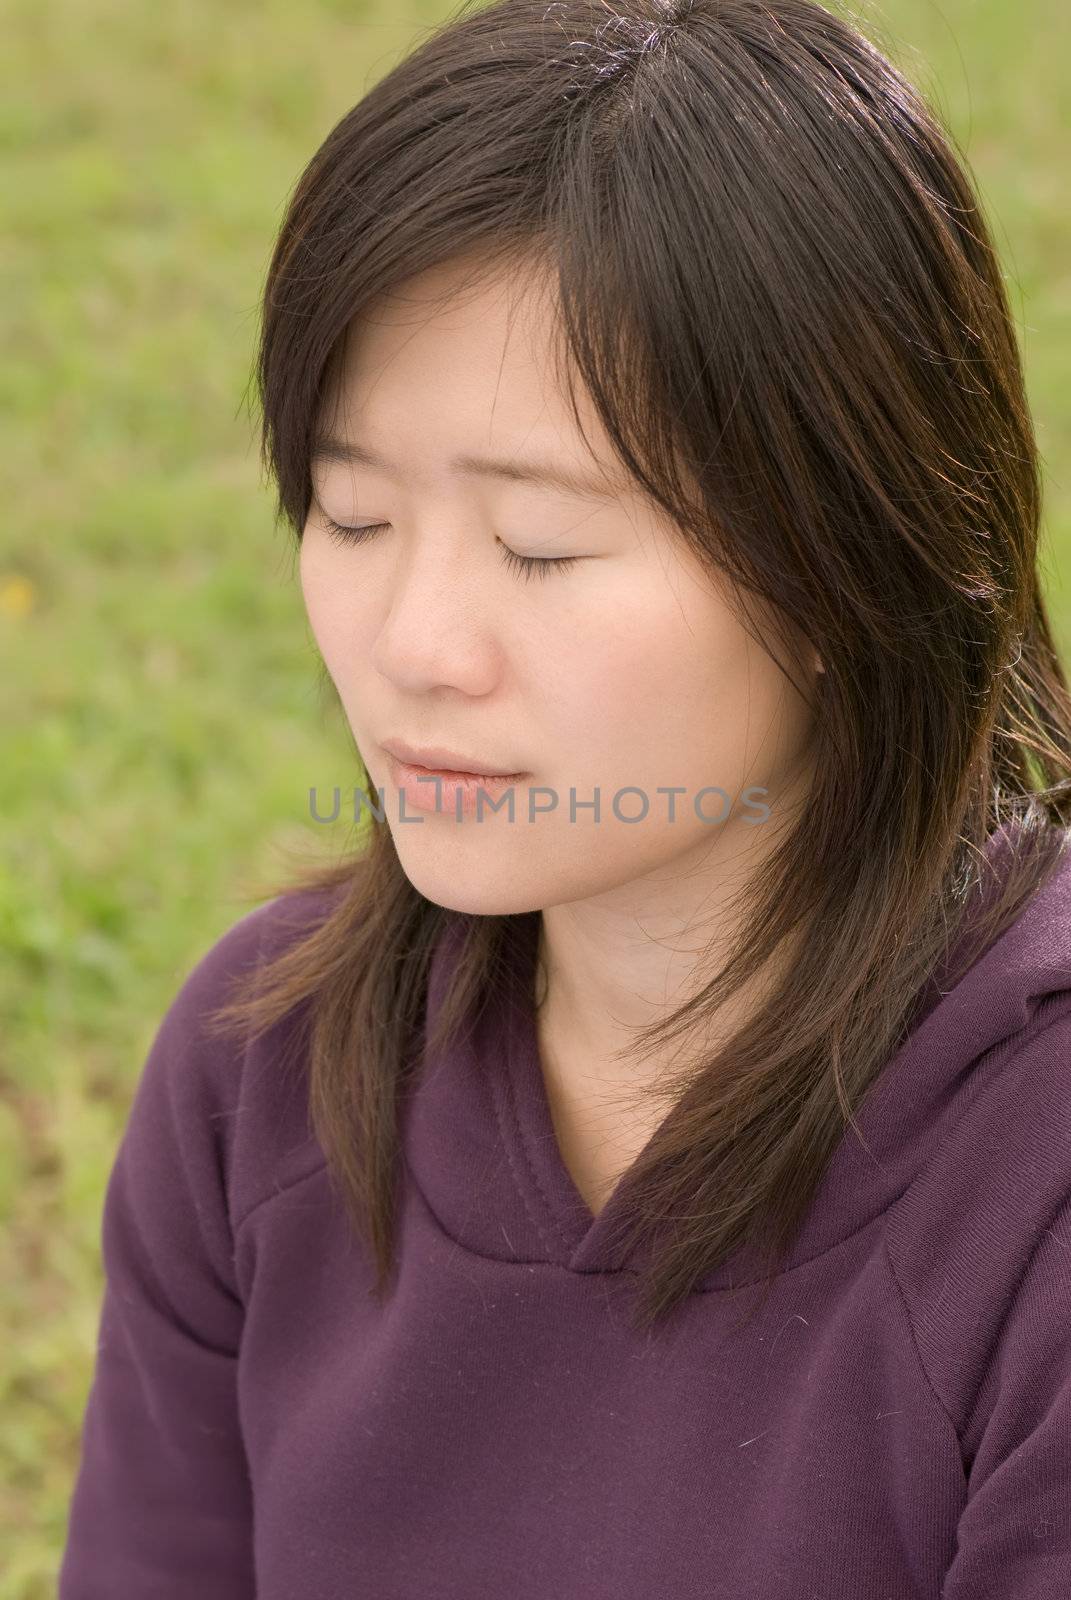 Meditation image of Asian woman sit and closed eyes in outdoor.